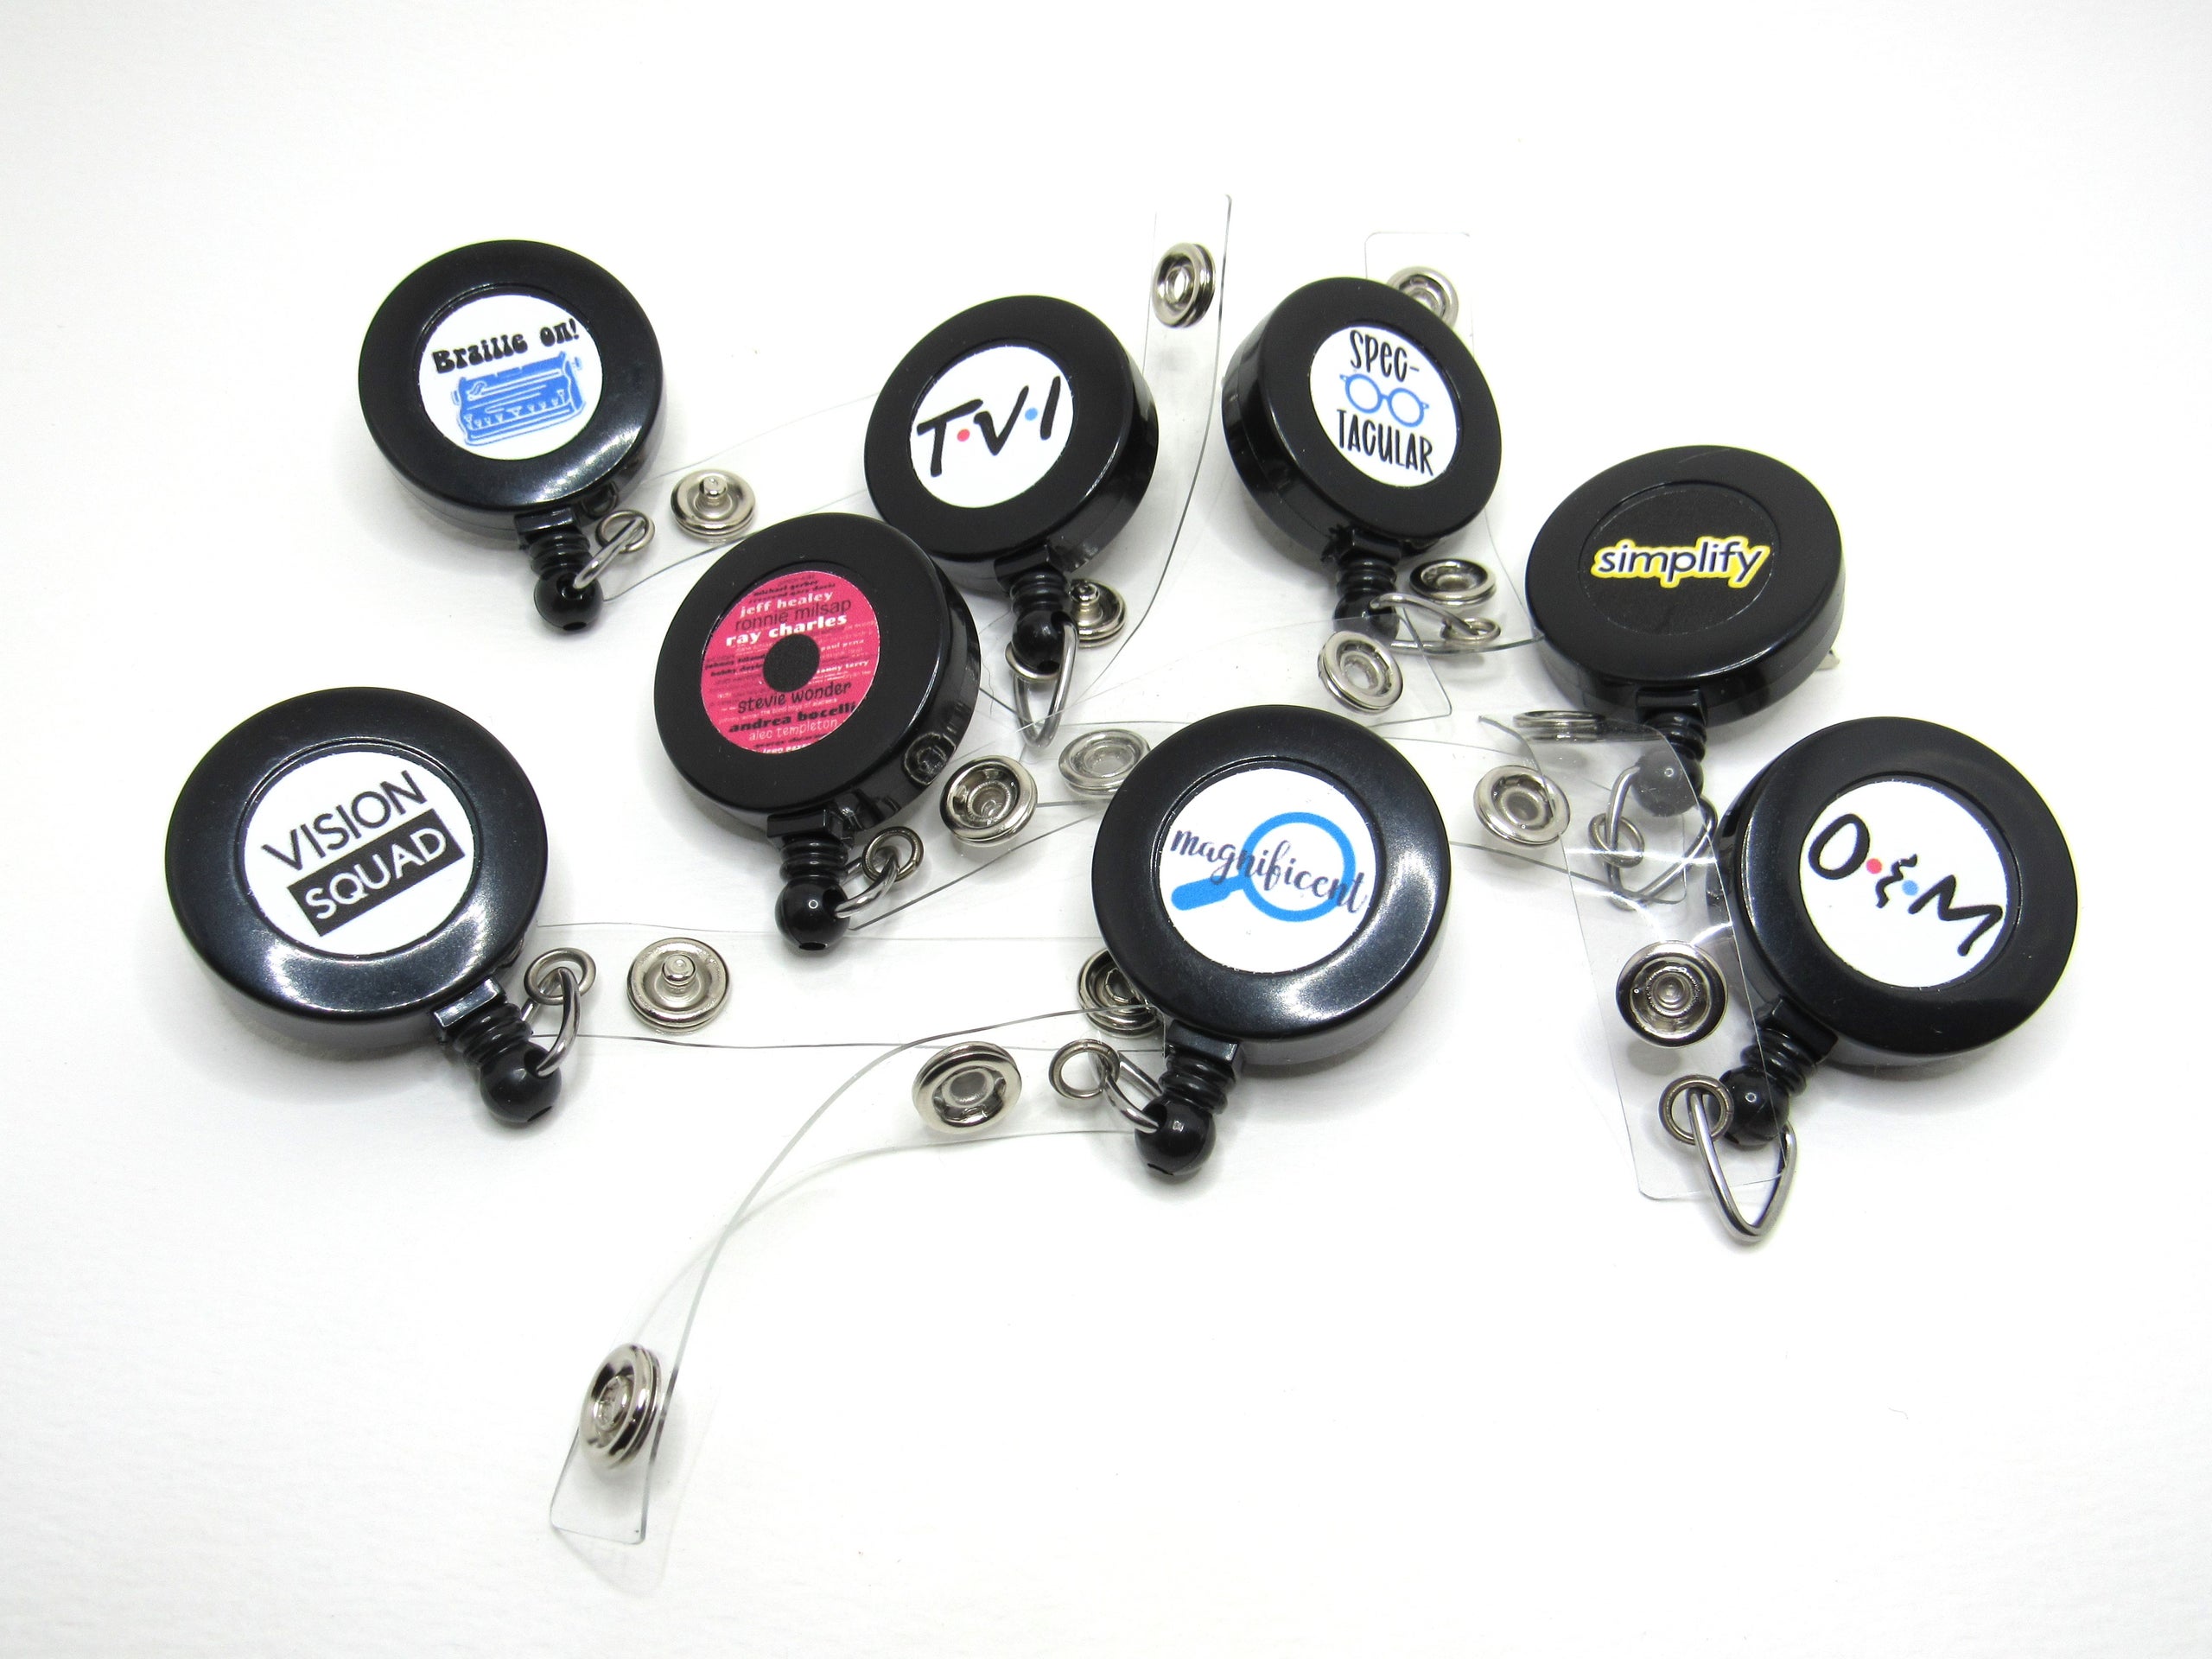 Vision-Themed Retractable Badge Holder